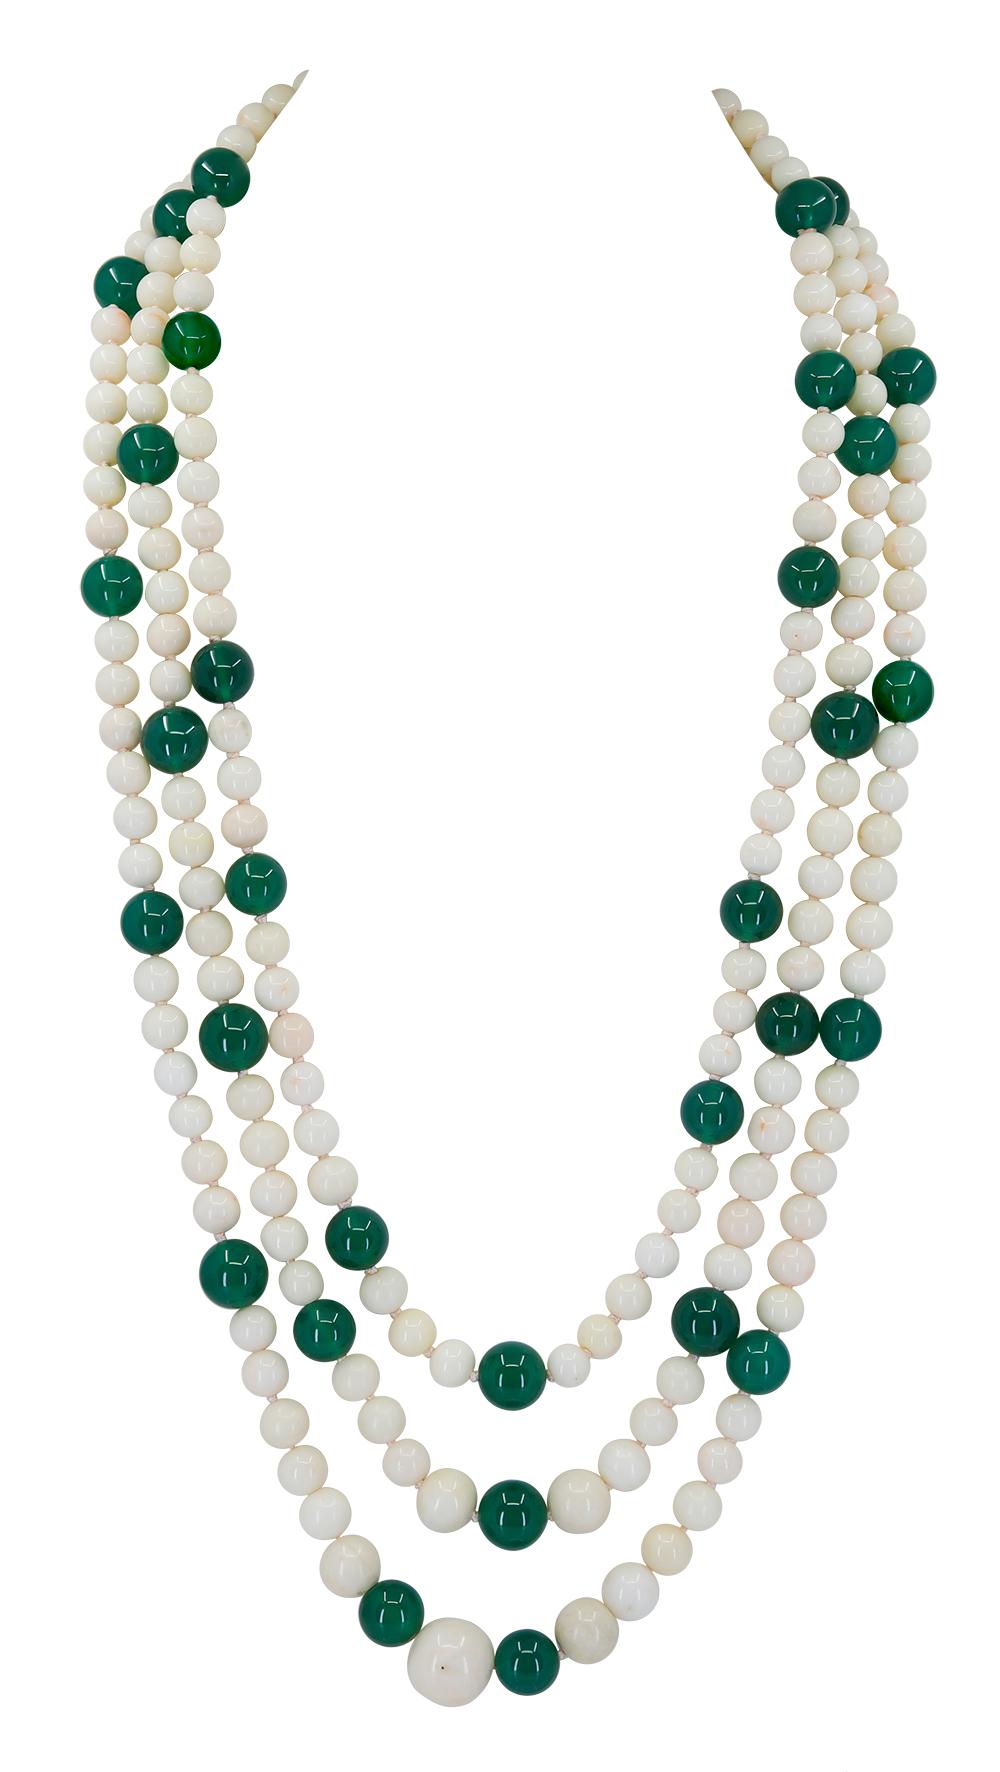 A 3 strand Green Onyx and White Coral necklace that measures 24, 26, and 30 inches in length and is made up of Natural untreated White Coral beads that measure from 7.5-15mm each offset by 12.5mm Lustrous Green Onyx beads. $3,600
